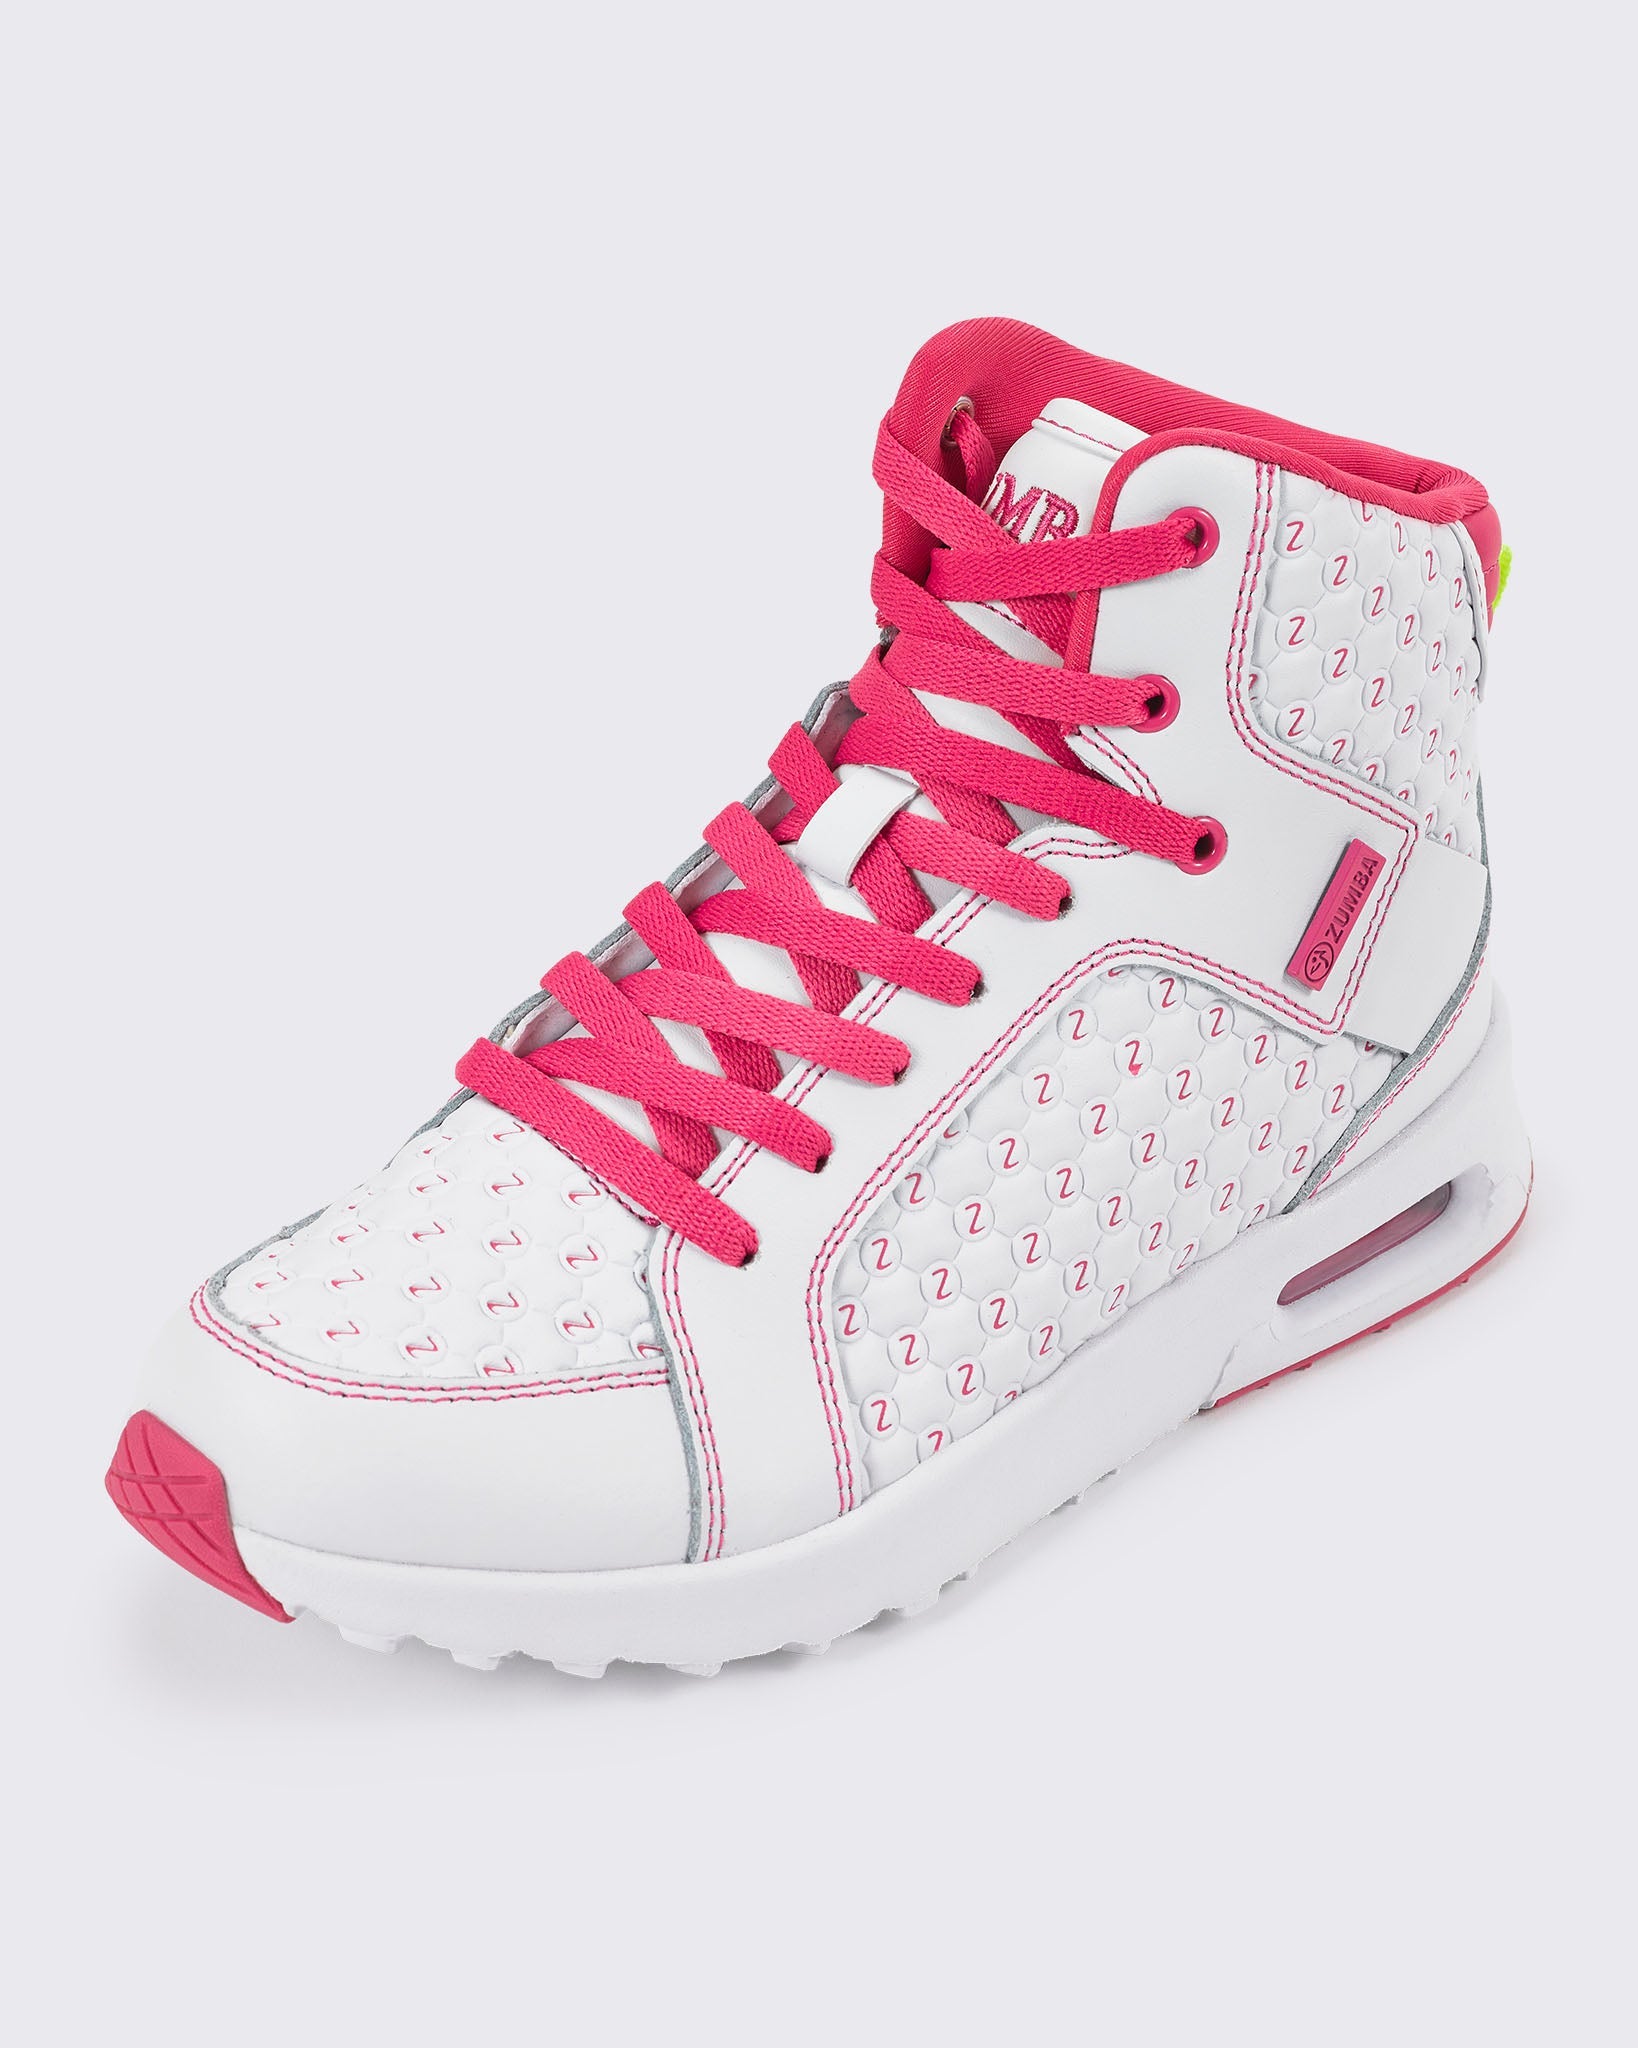 Zumba Sneakers High-Top Dance Shoes for Women Pink Air Classic